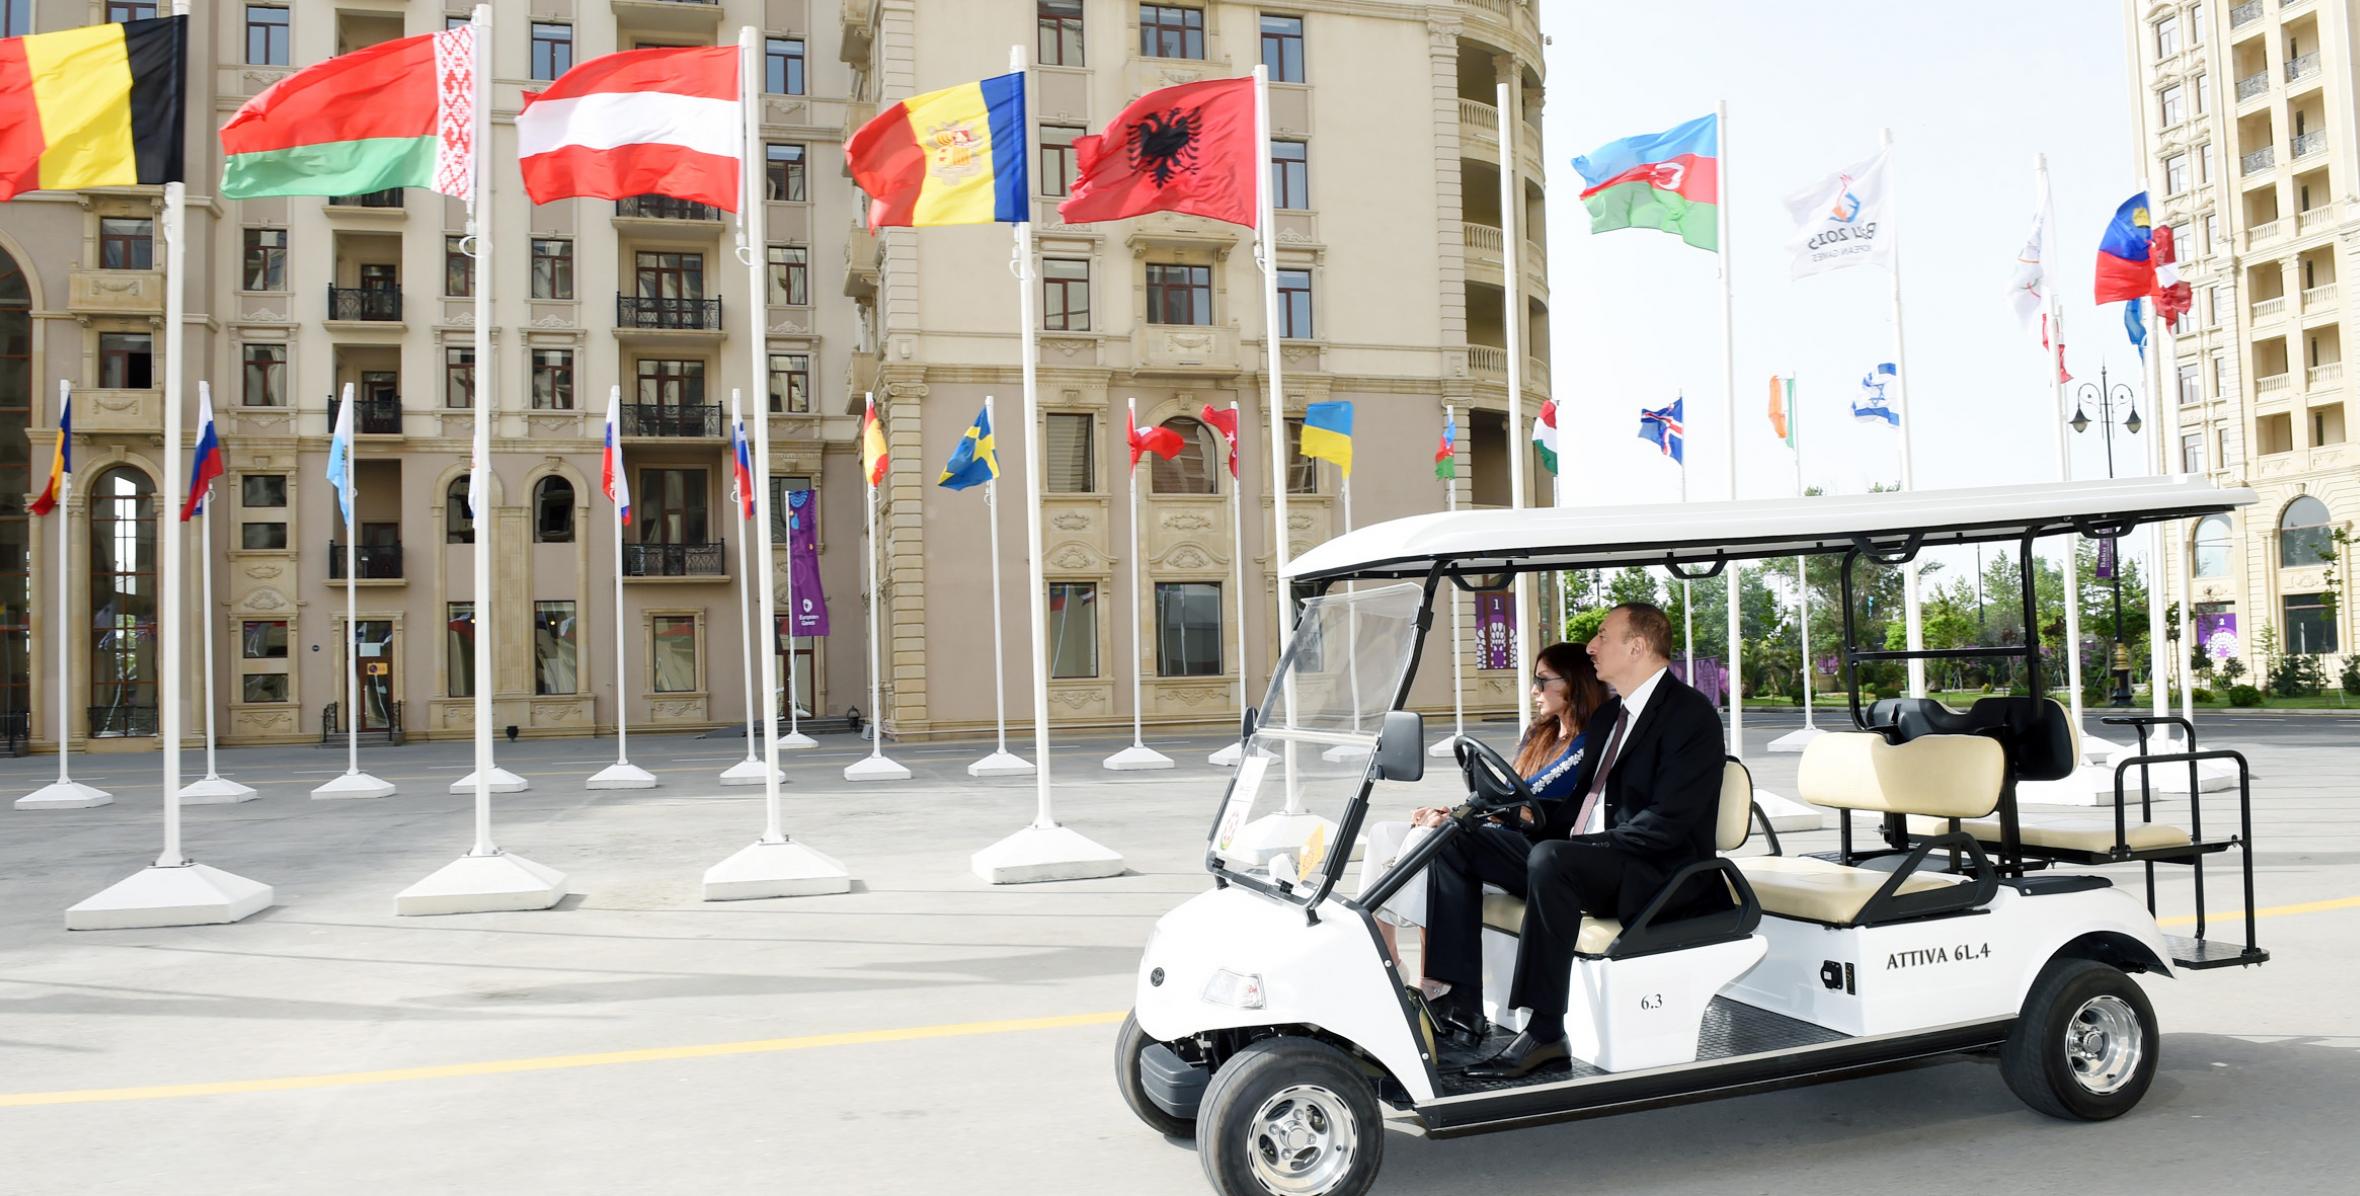 Ilham Aliyev attended the opening of the Athletes and Media Villages of the first European Games